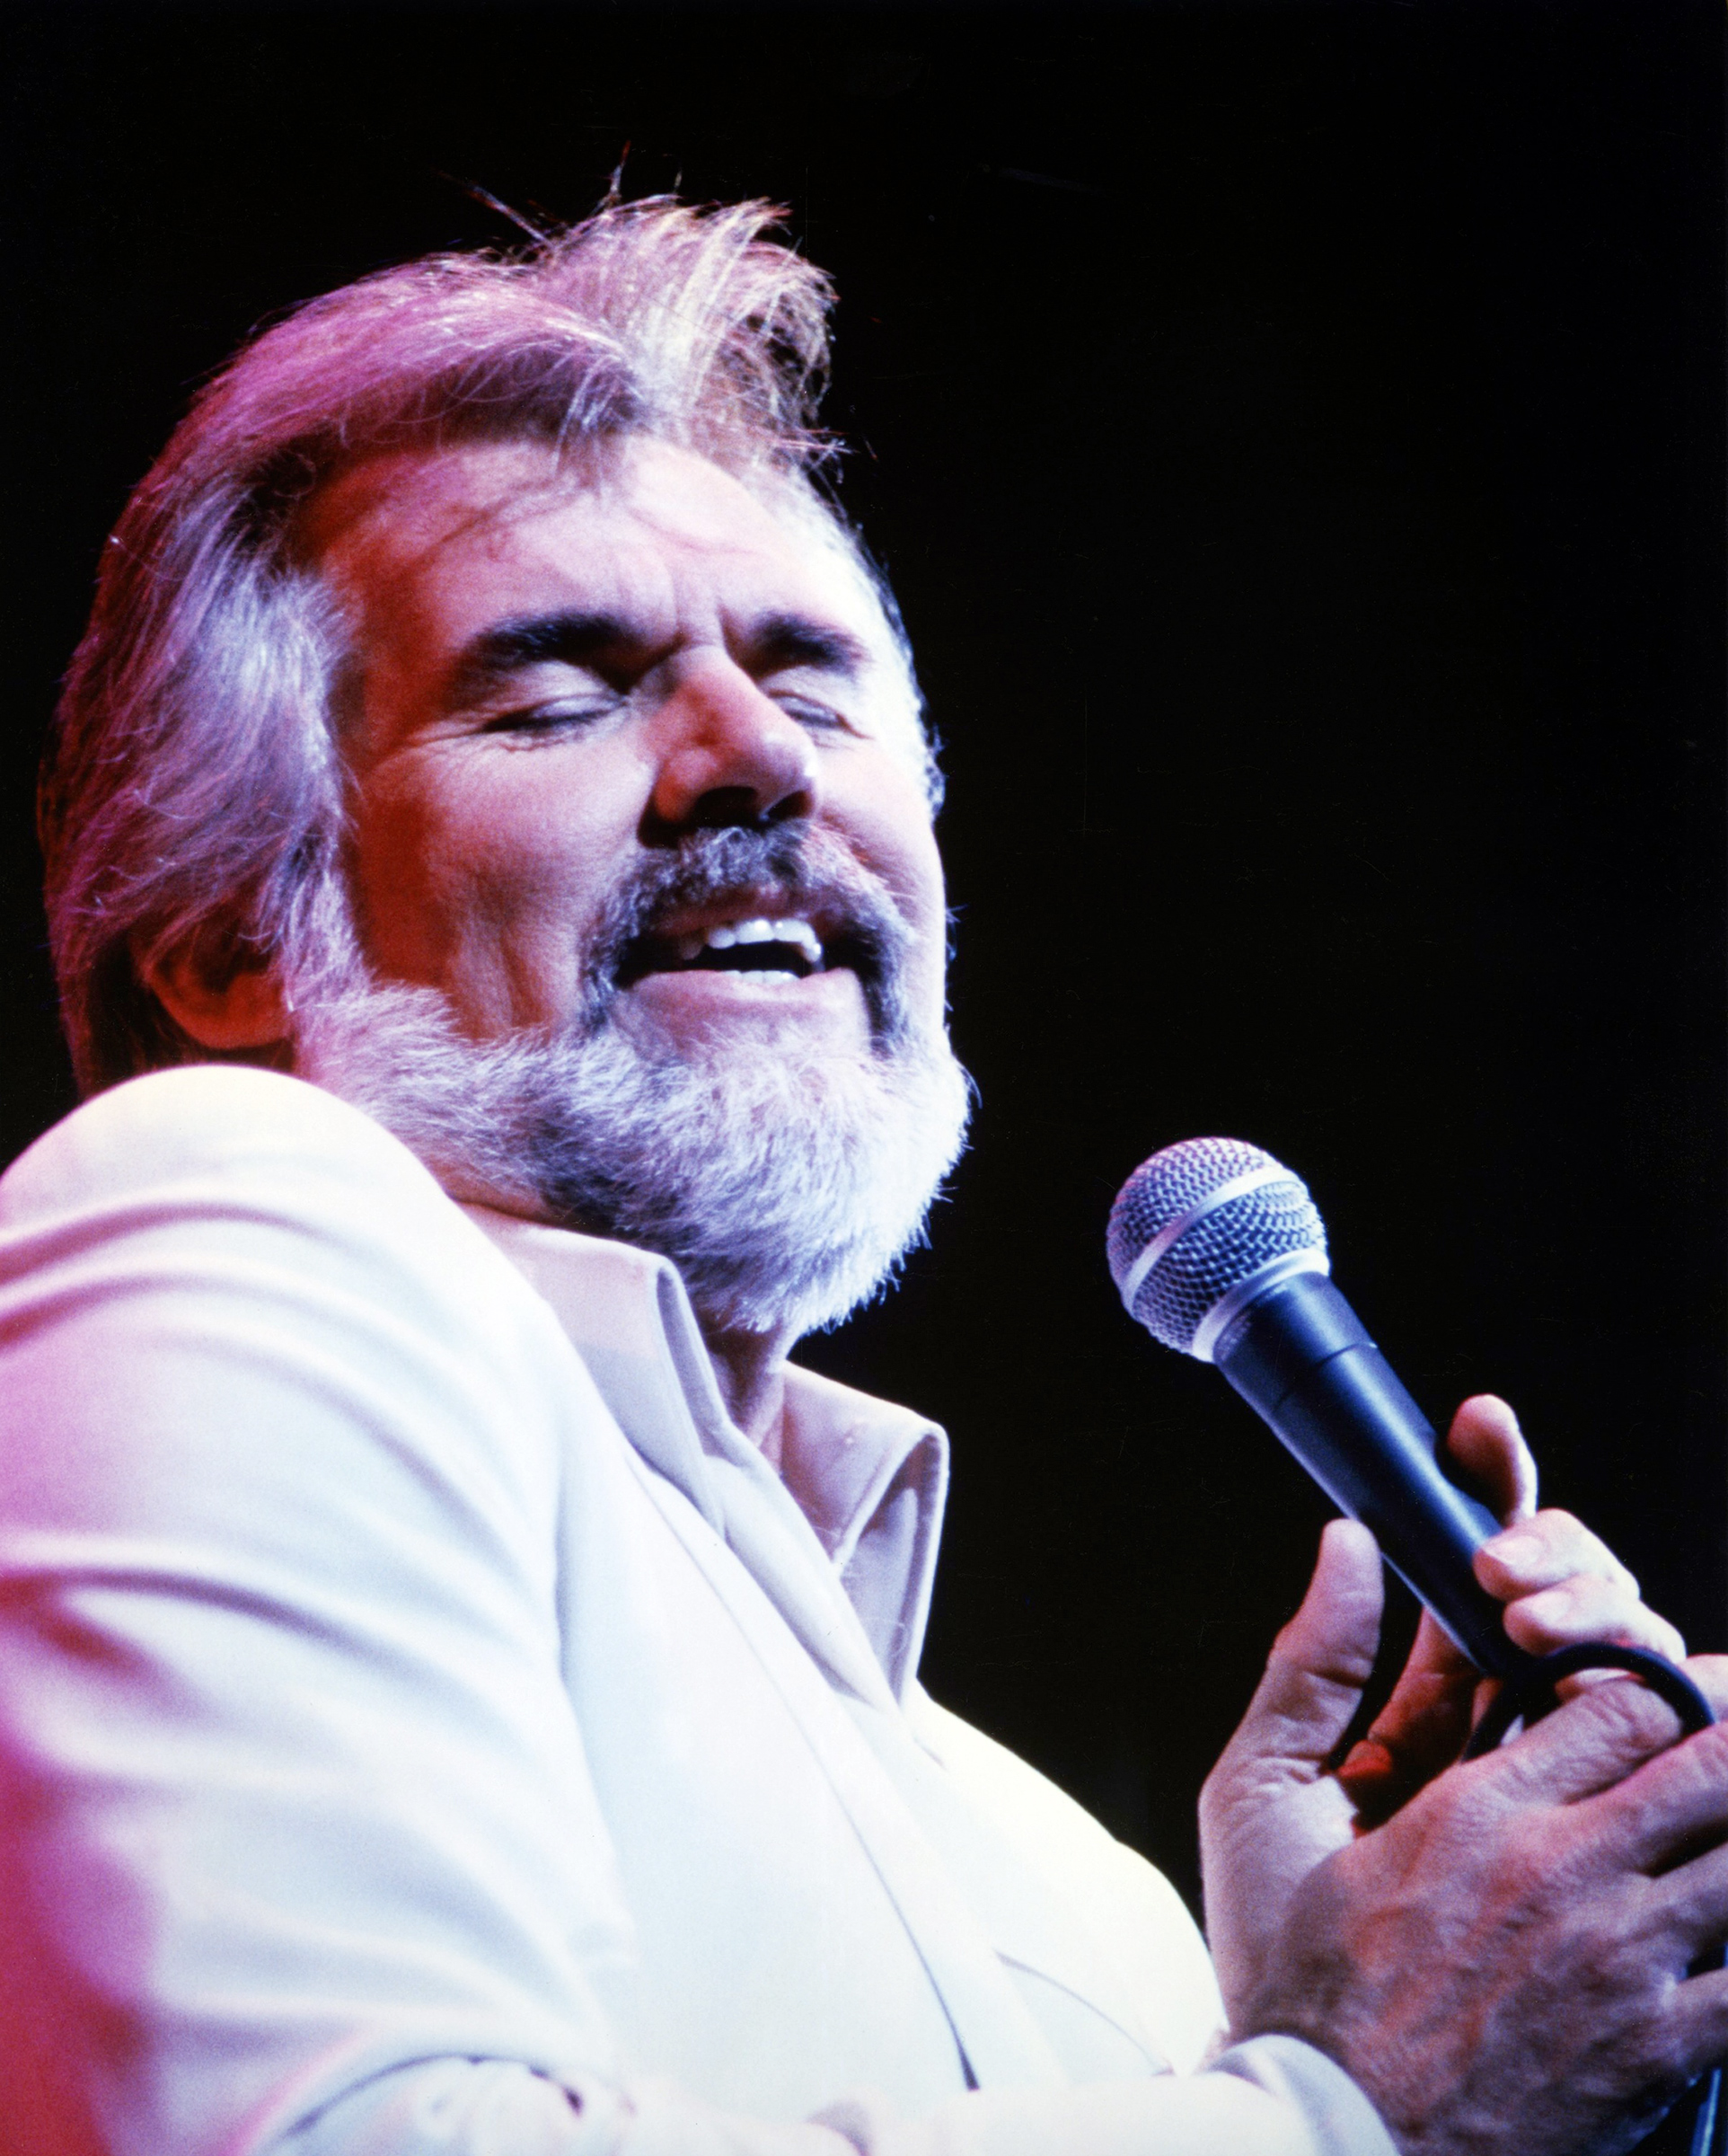 Rogers, who was inducted into the Country Music Hall of Fame in 2013, singing circa 1980